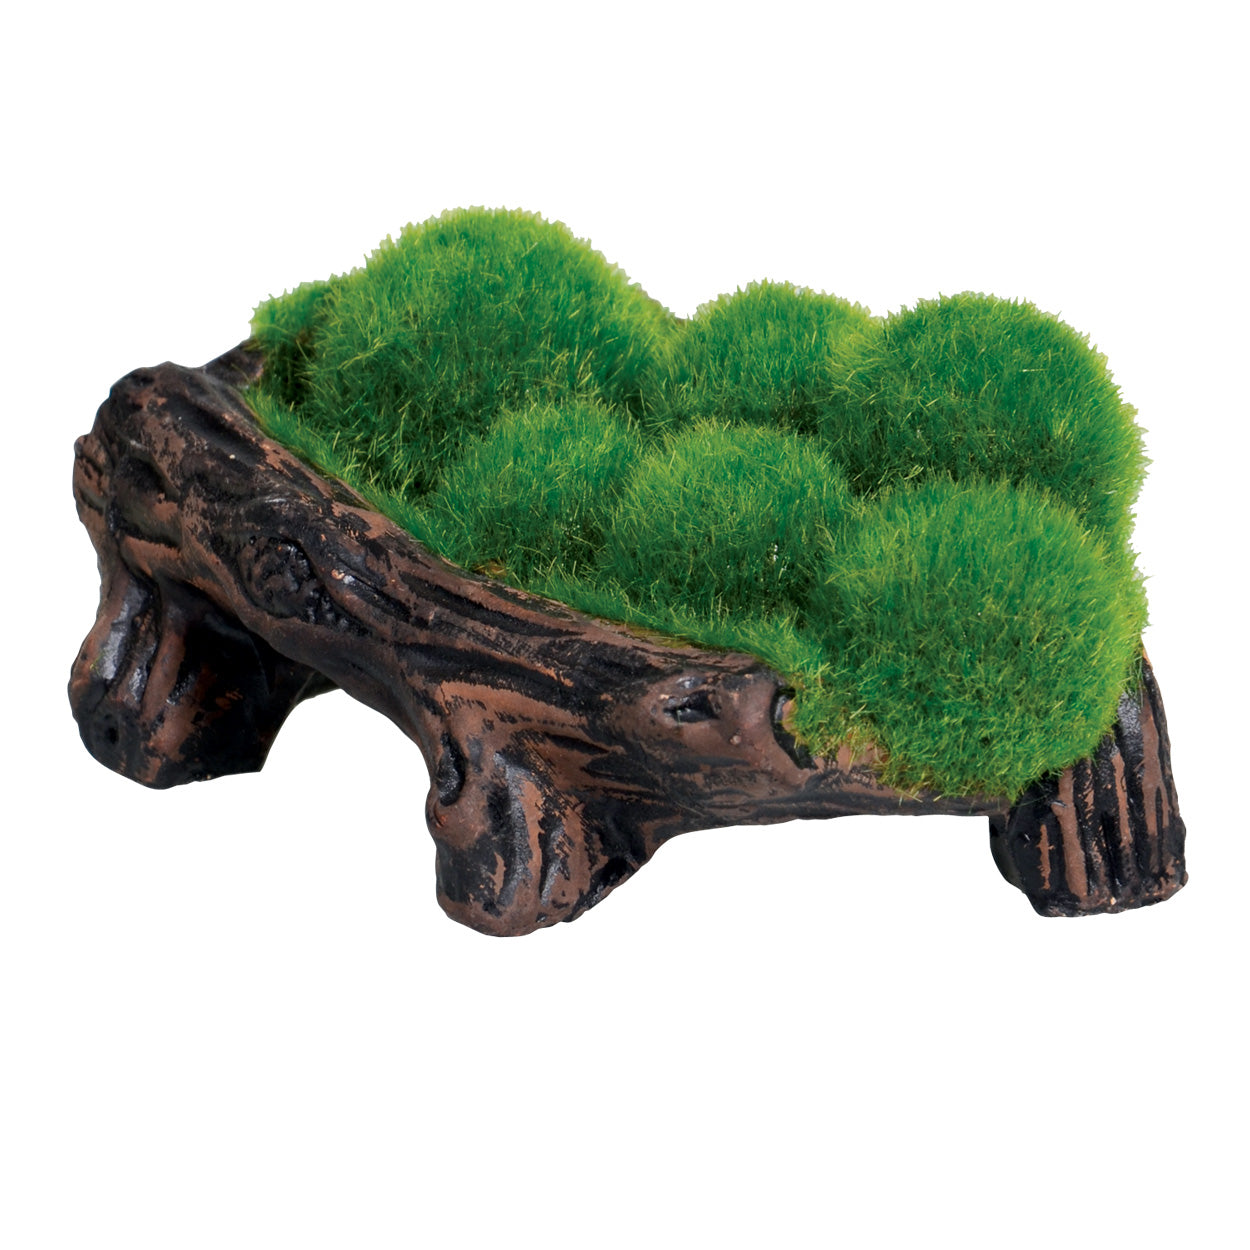 Underwater Treasures Mossy Log Cave with Airstone